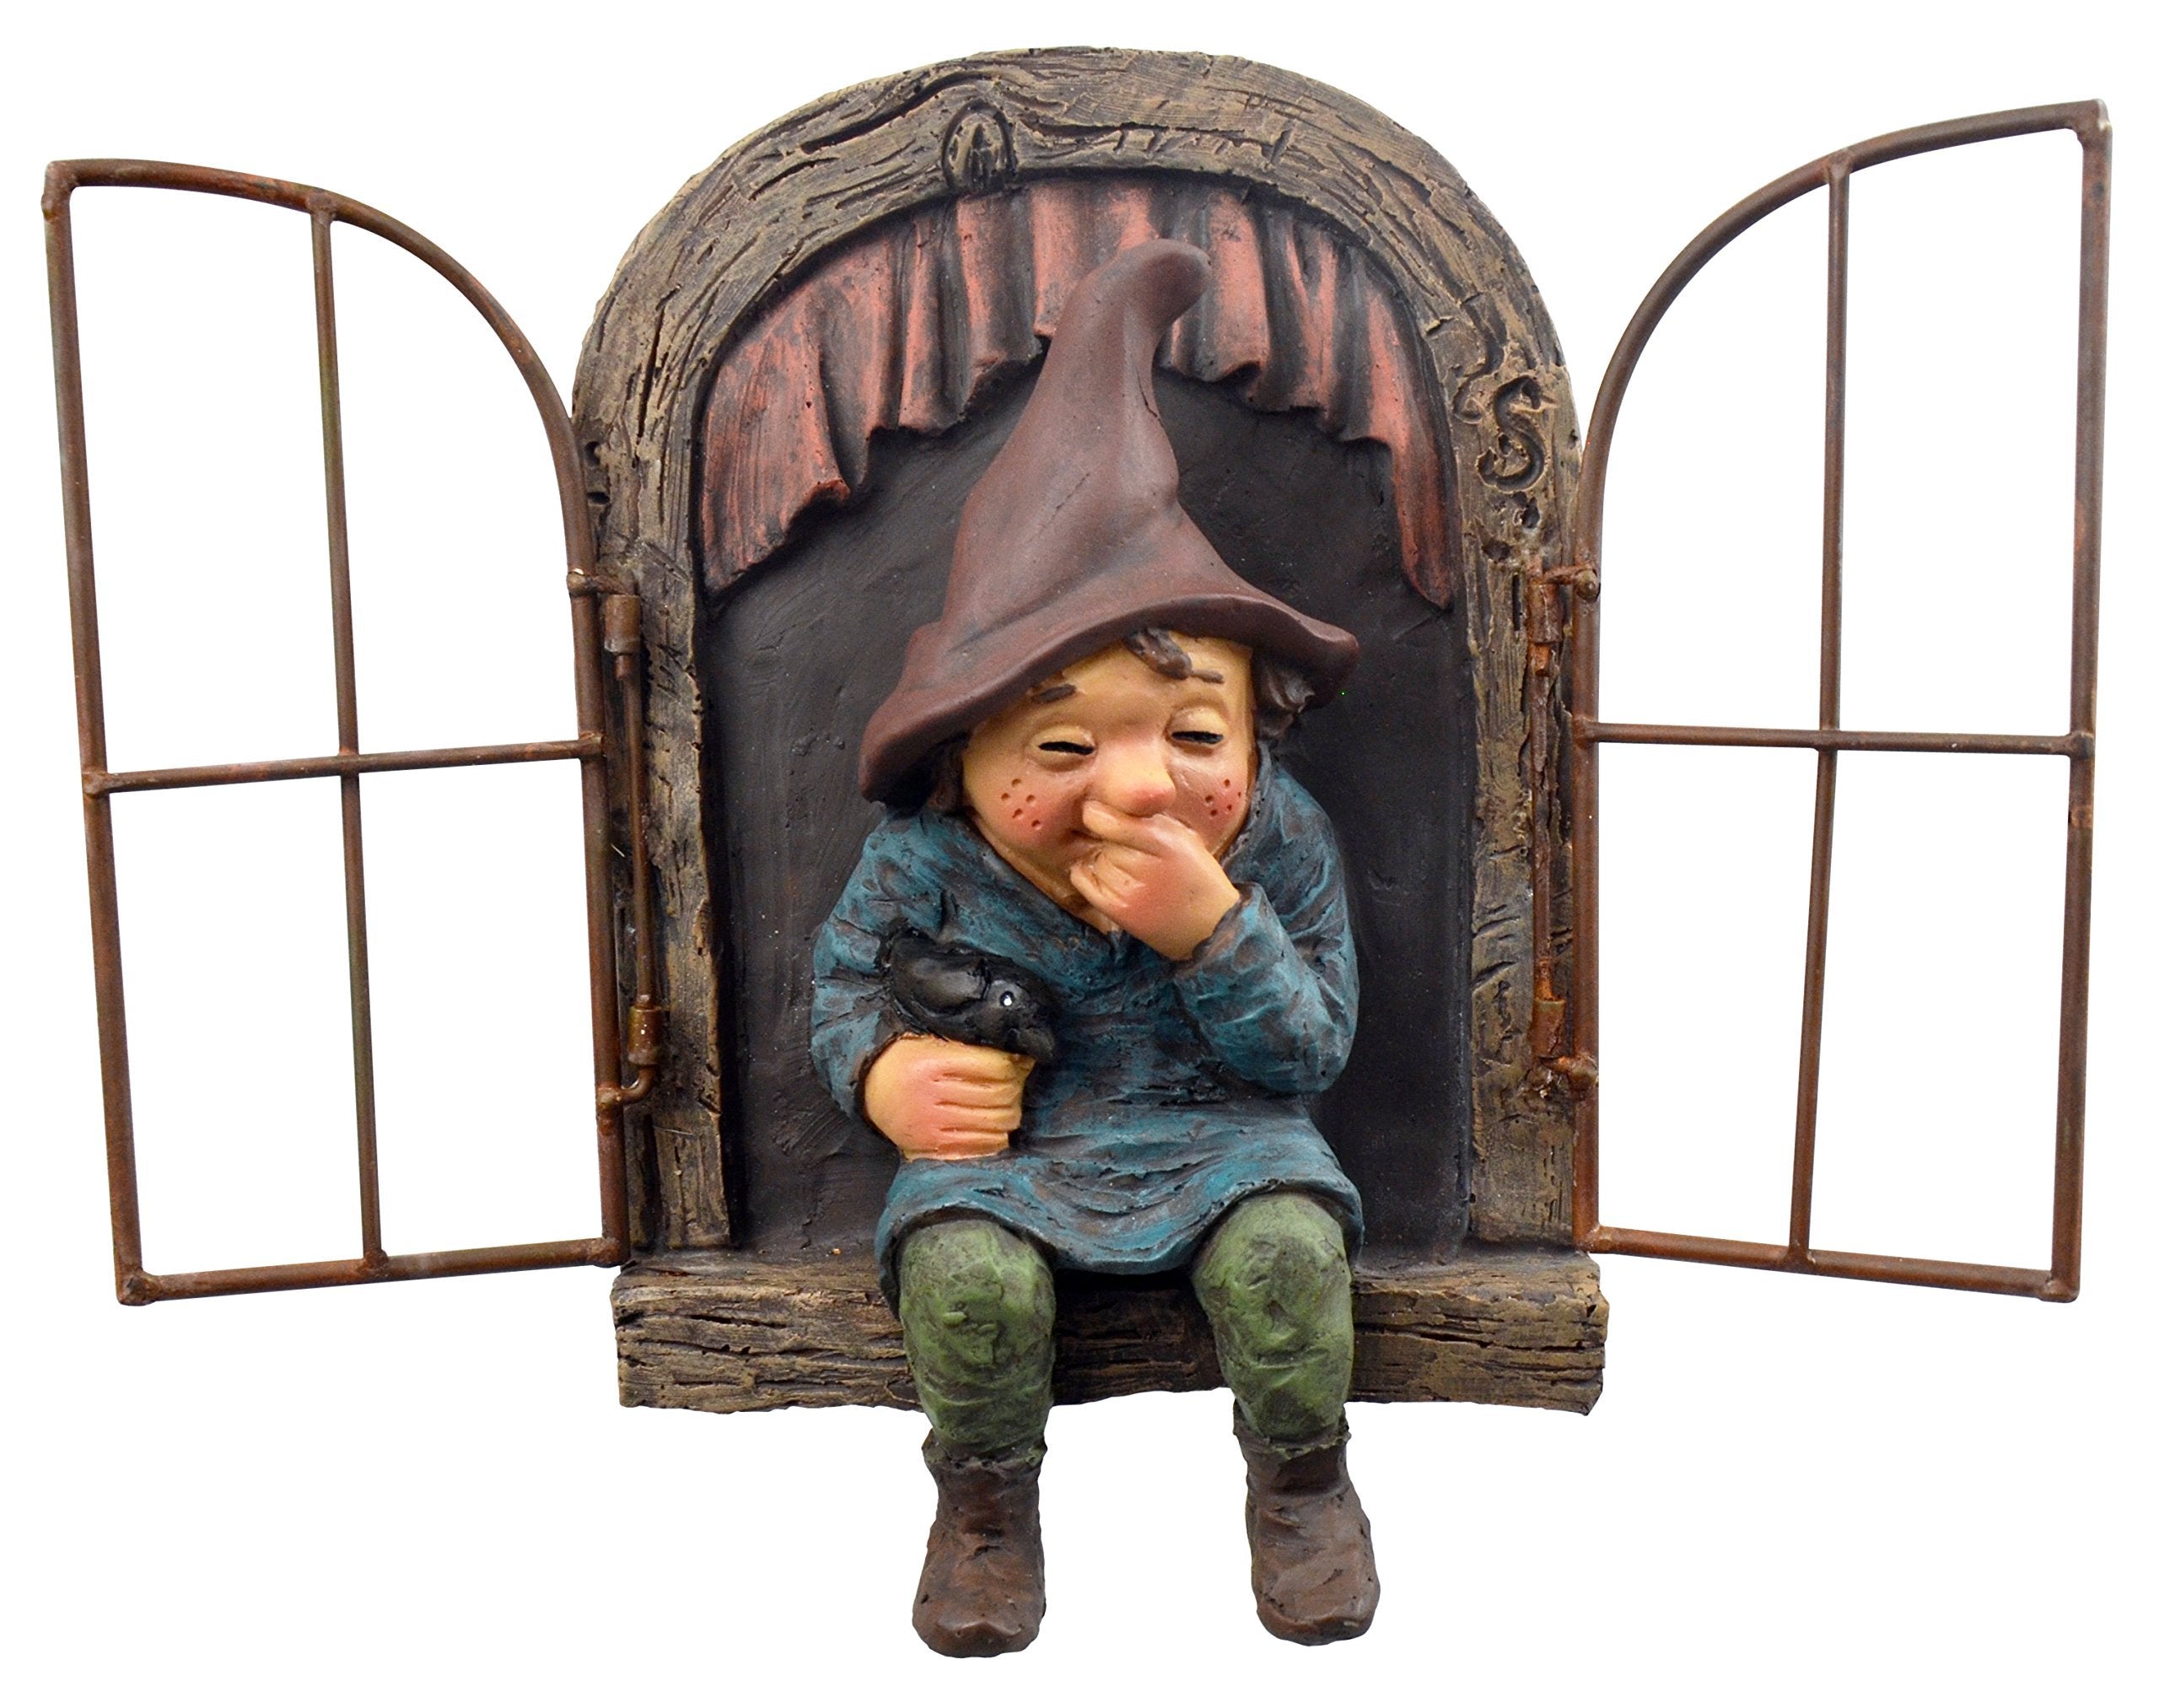 Giggling Gnome Sitting on a Window Sill